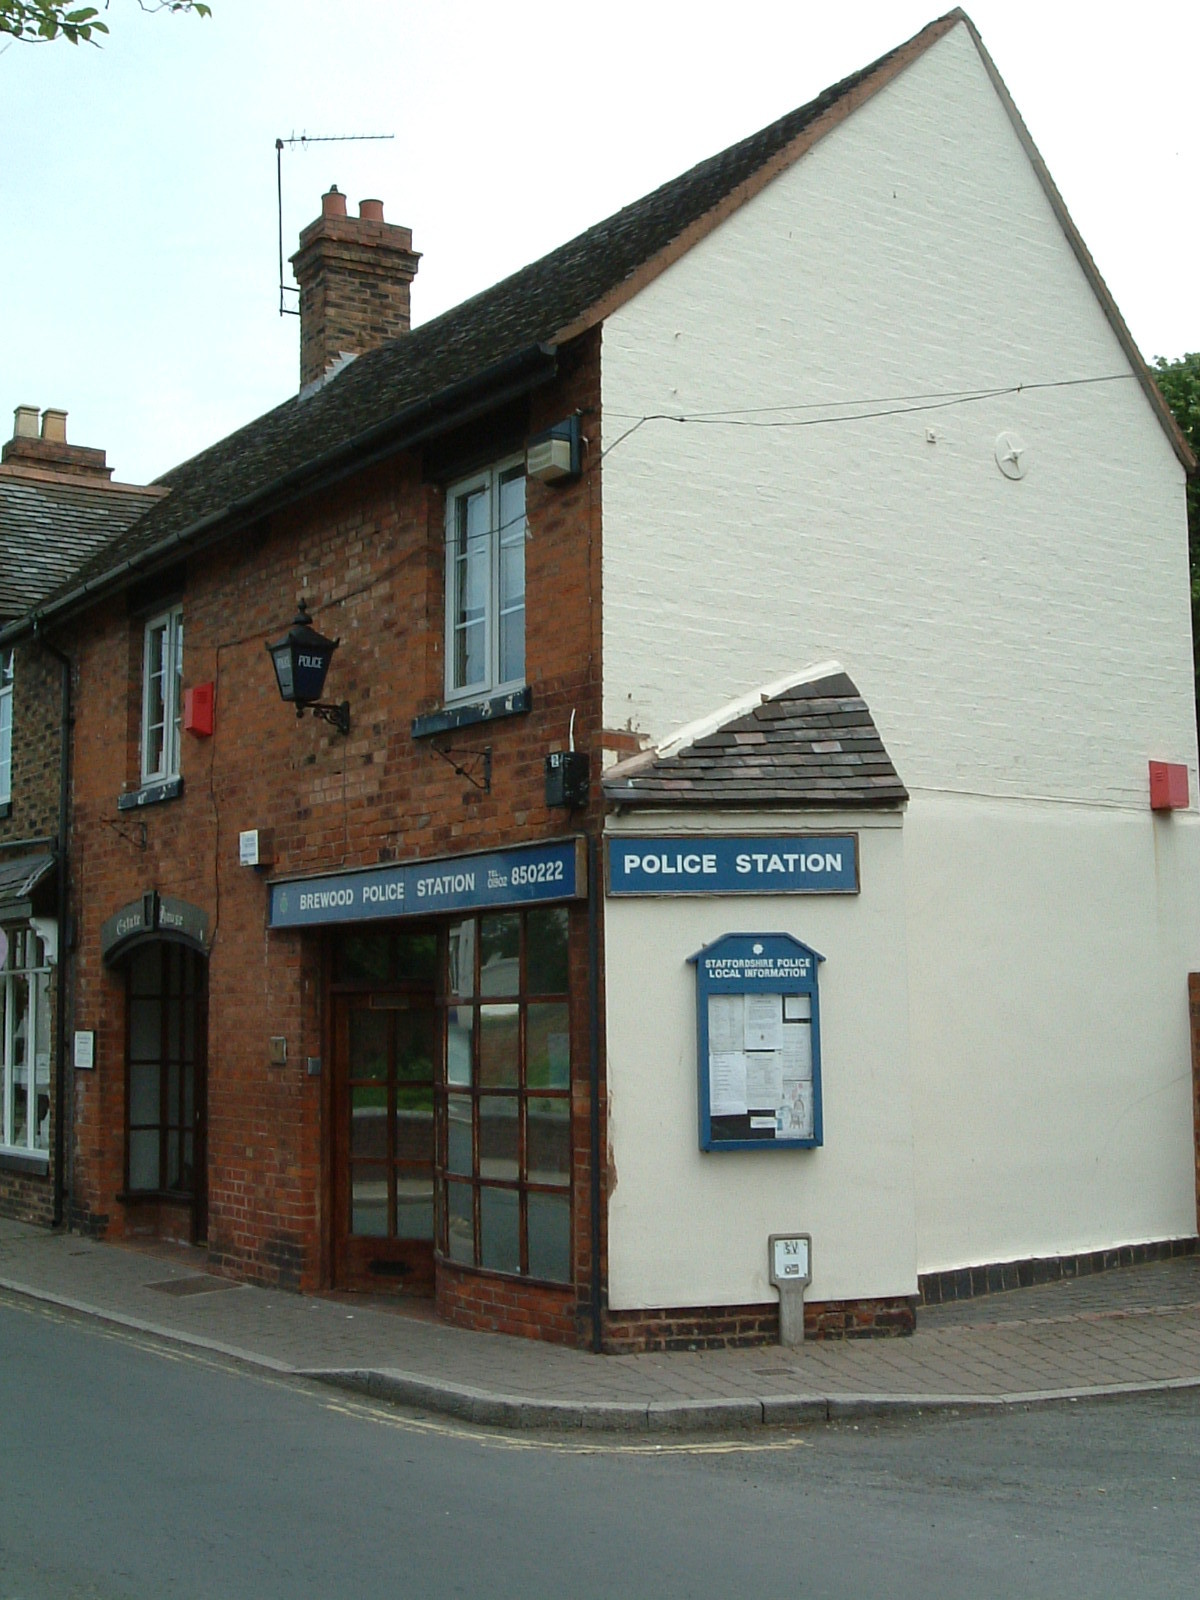 The Police Station in Brewood